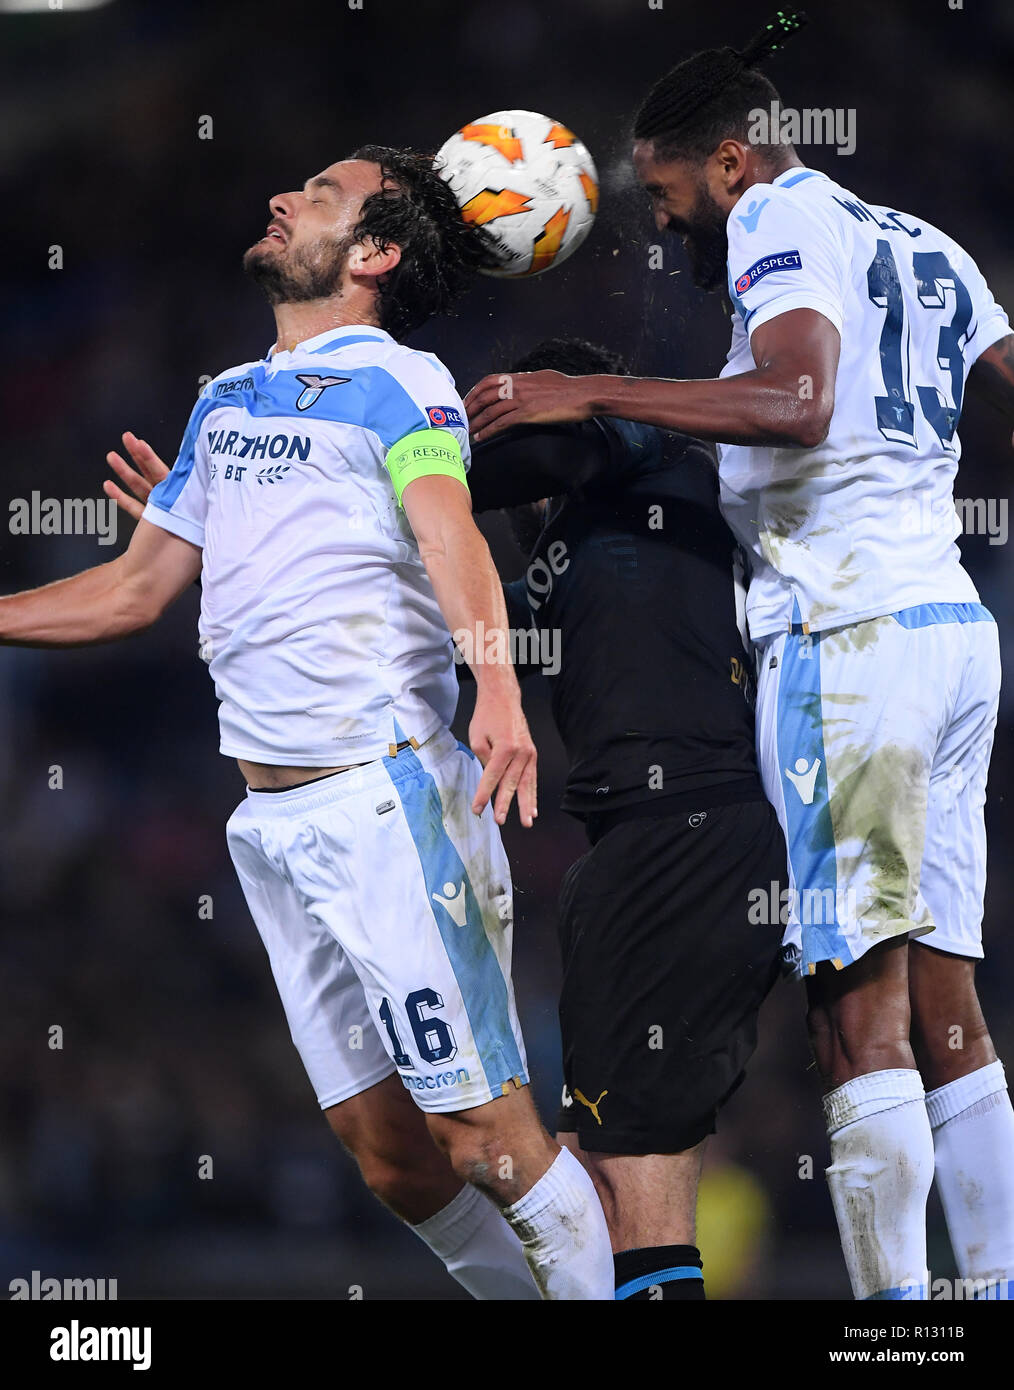 Rome, Italy. 8th Nov, 2018. Lazio's Marco Parolo (L) and Wallace (R) vie with Marseille's Adil Rami during the UEFA Europa League Group H match between Lazio and Marseille in Rome, Italy, Nov. 8, 2018. Lazio won 2-1. Credit: Alberto Lingria/Xinhua/Alamy Live News Stock Photo